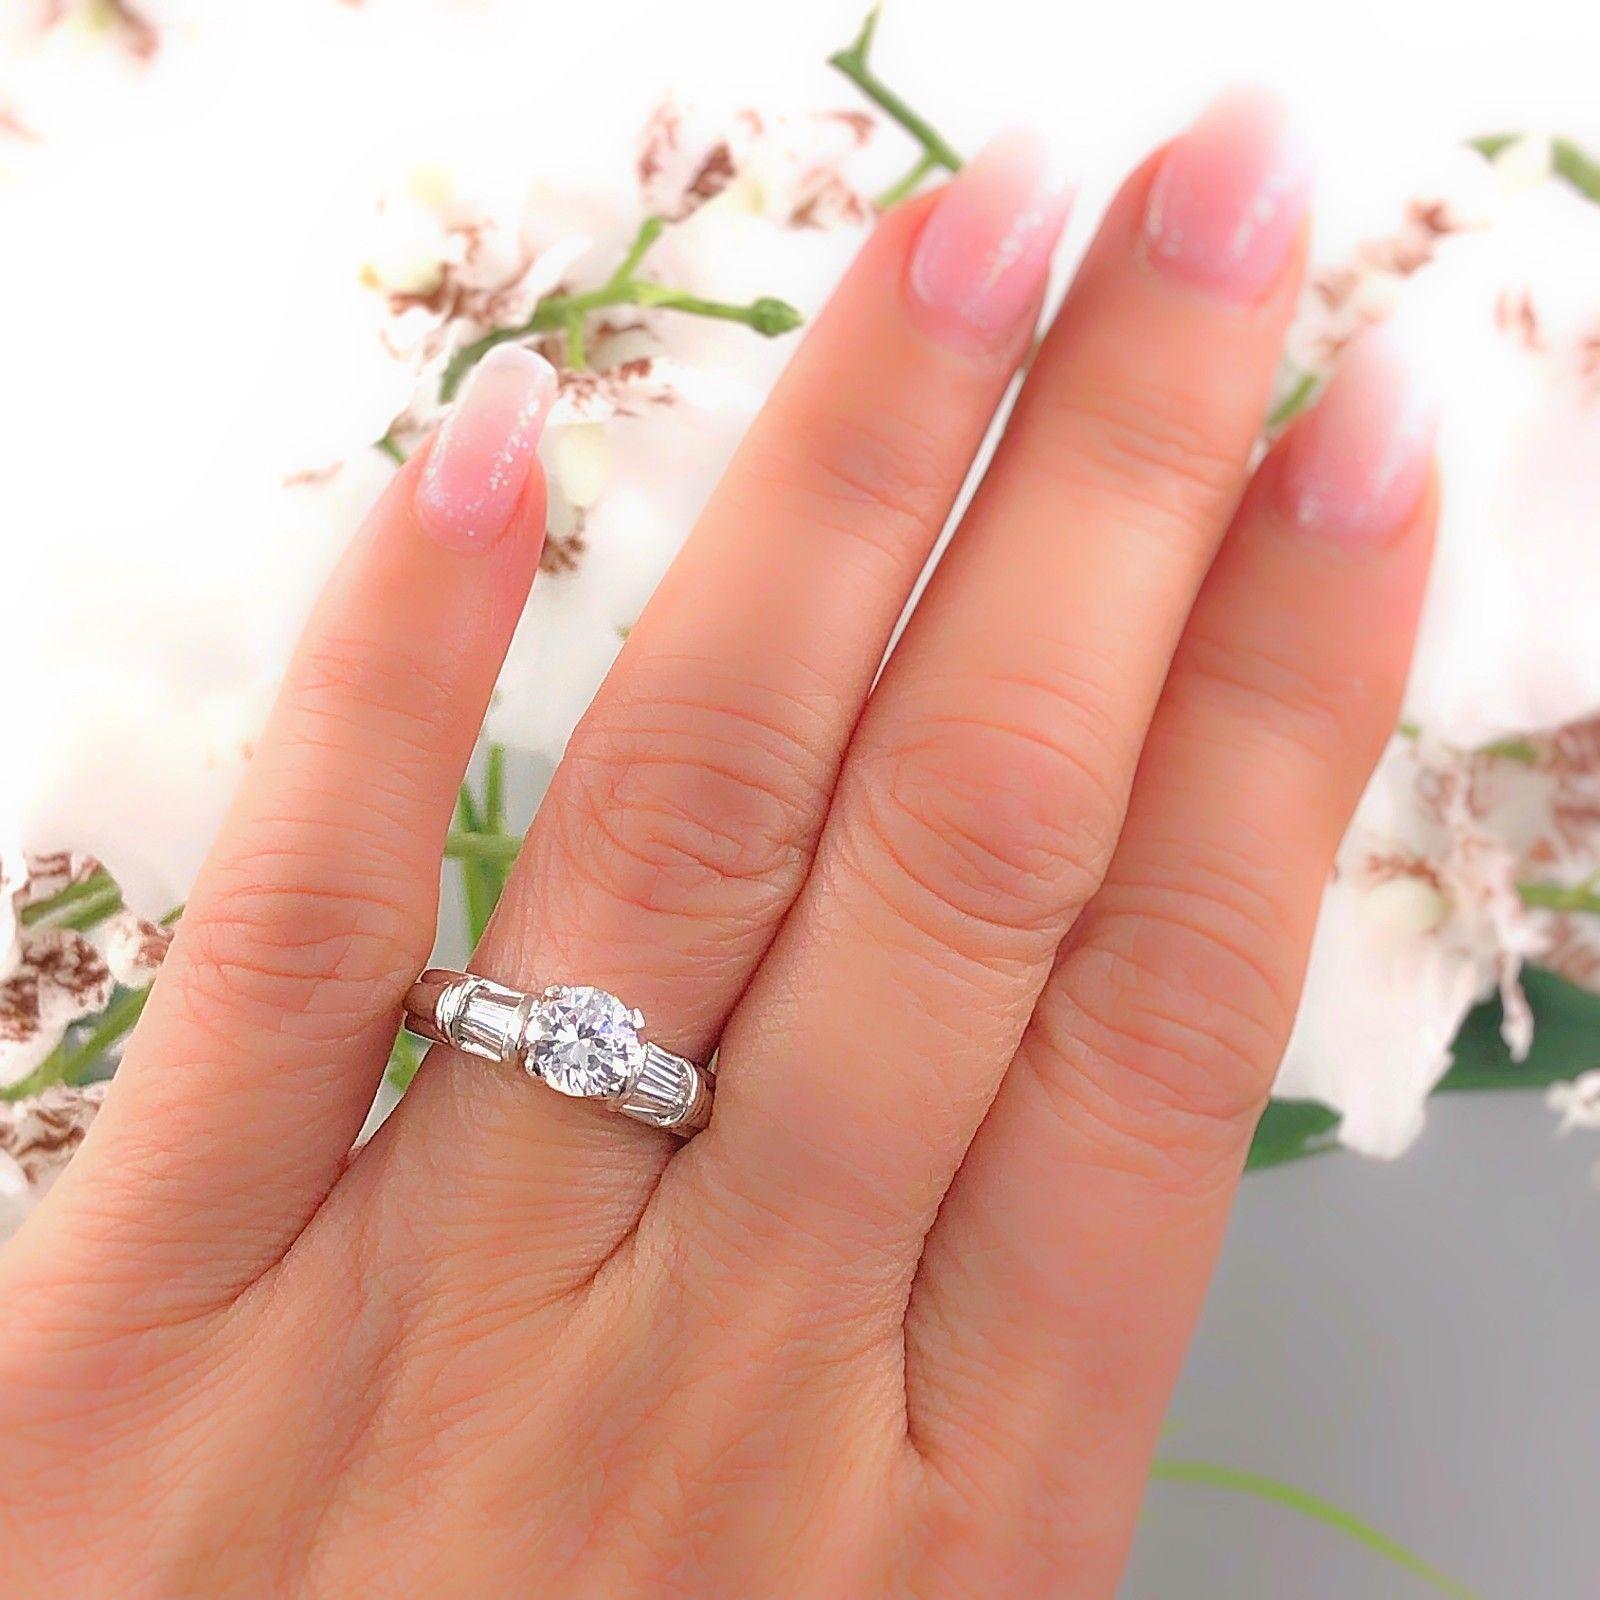 Brand: Scott Kay
Style:  Solitaire with Baguettes Semi Mount
Metal:  Platinum
Size:  6.75 - sizable
Total Carat Weight:  0.28 tcw
Diamond Shape:  Center is Currently a CZ - Will Hold 1.00ct Round
Accent Diamond Color & Clarity: Tapered Baguettes